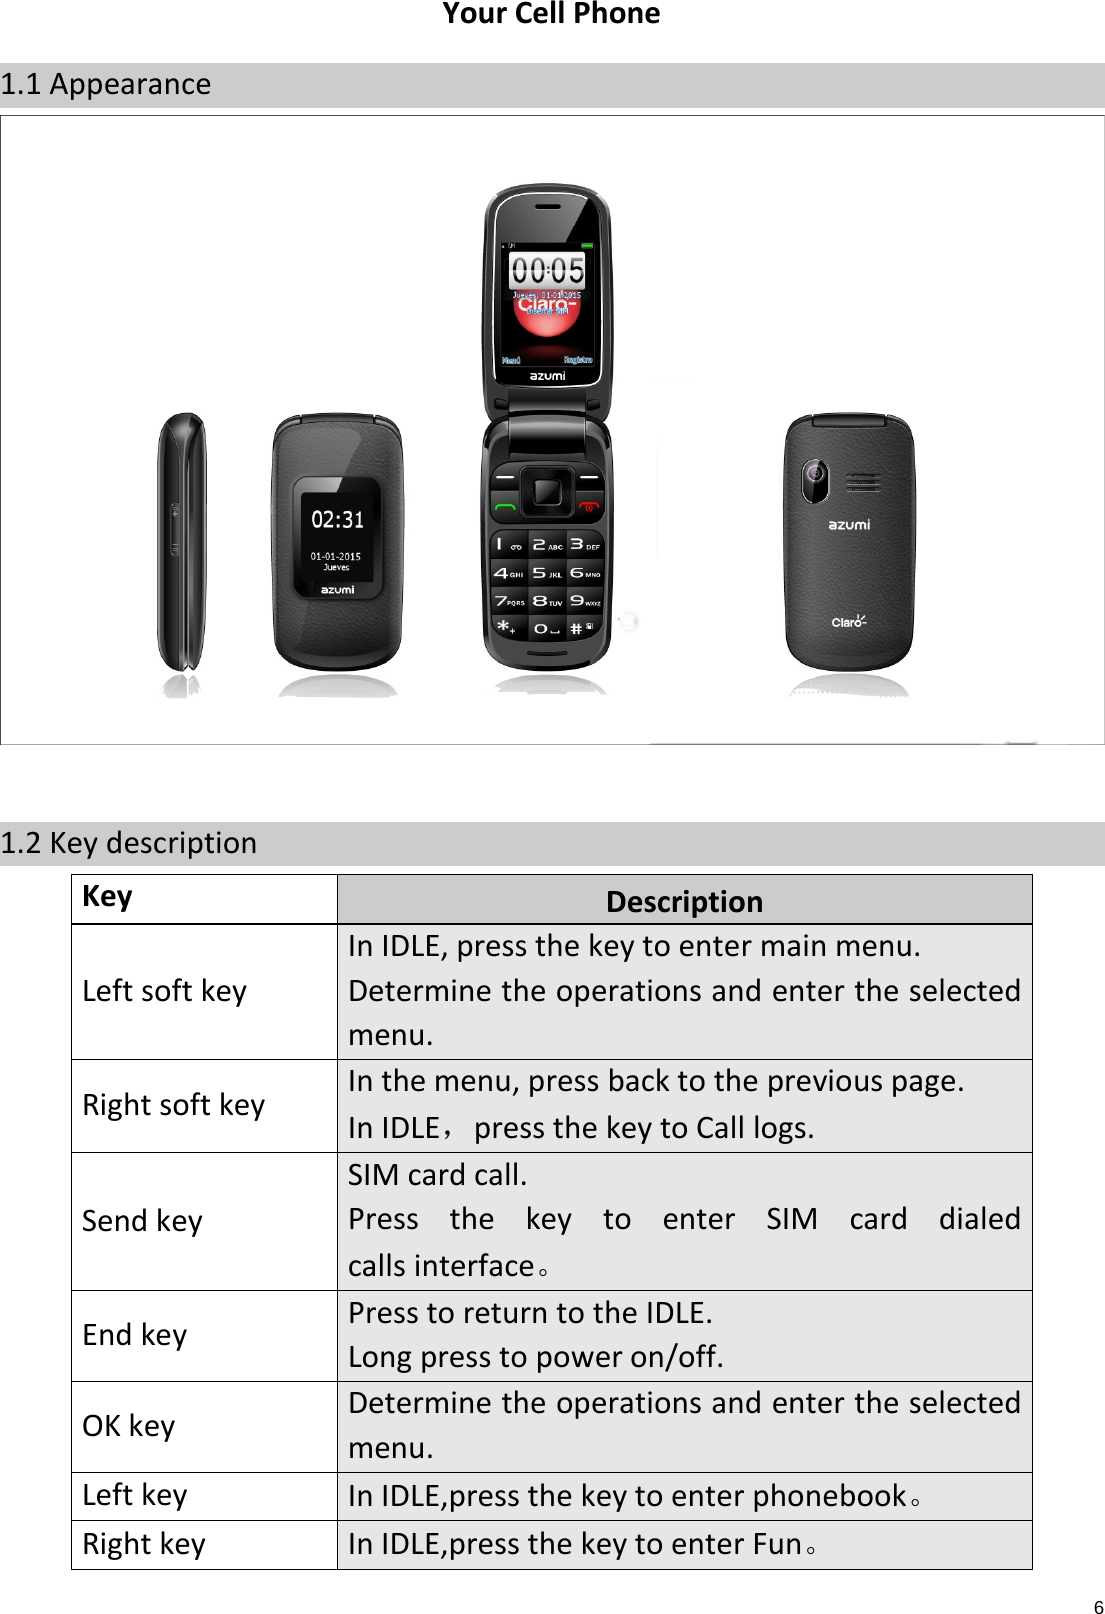  6  Your Cell Phone 1.1 Appearance   1.2 Key description Key Description Left soft key In IDLE, press the key to enter main menu. Determine the operations and enter the selected menu. Right soft key In the menu, press back to the previous page. In IDLE，press the key to Call logs. Send key SIM card call. Press  the  key  to  enter SIM card dialed calls interface。 End key Press to return to the IDLE. Long press to power on/off. OK key Determine the operations and enter the selected menu. Left key In IDLE,press the key to enter phonebook。 Right key In IDLE,press the key to enter Fun。 